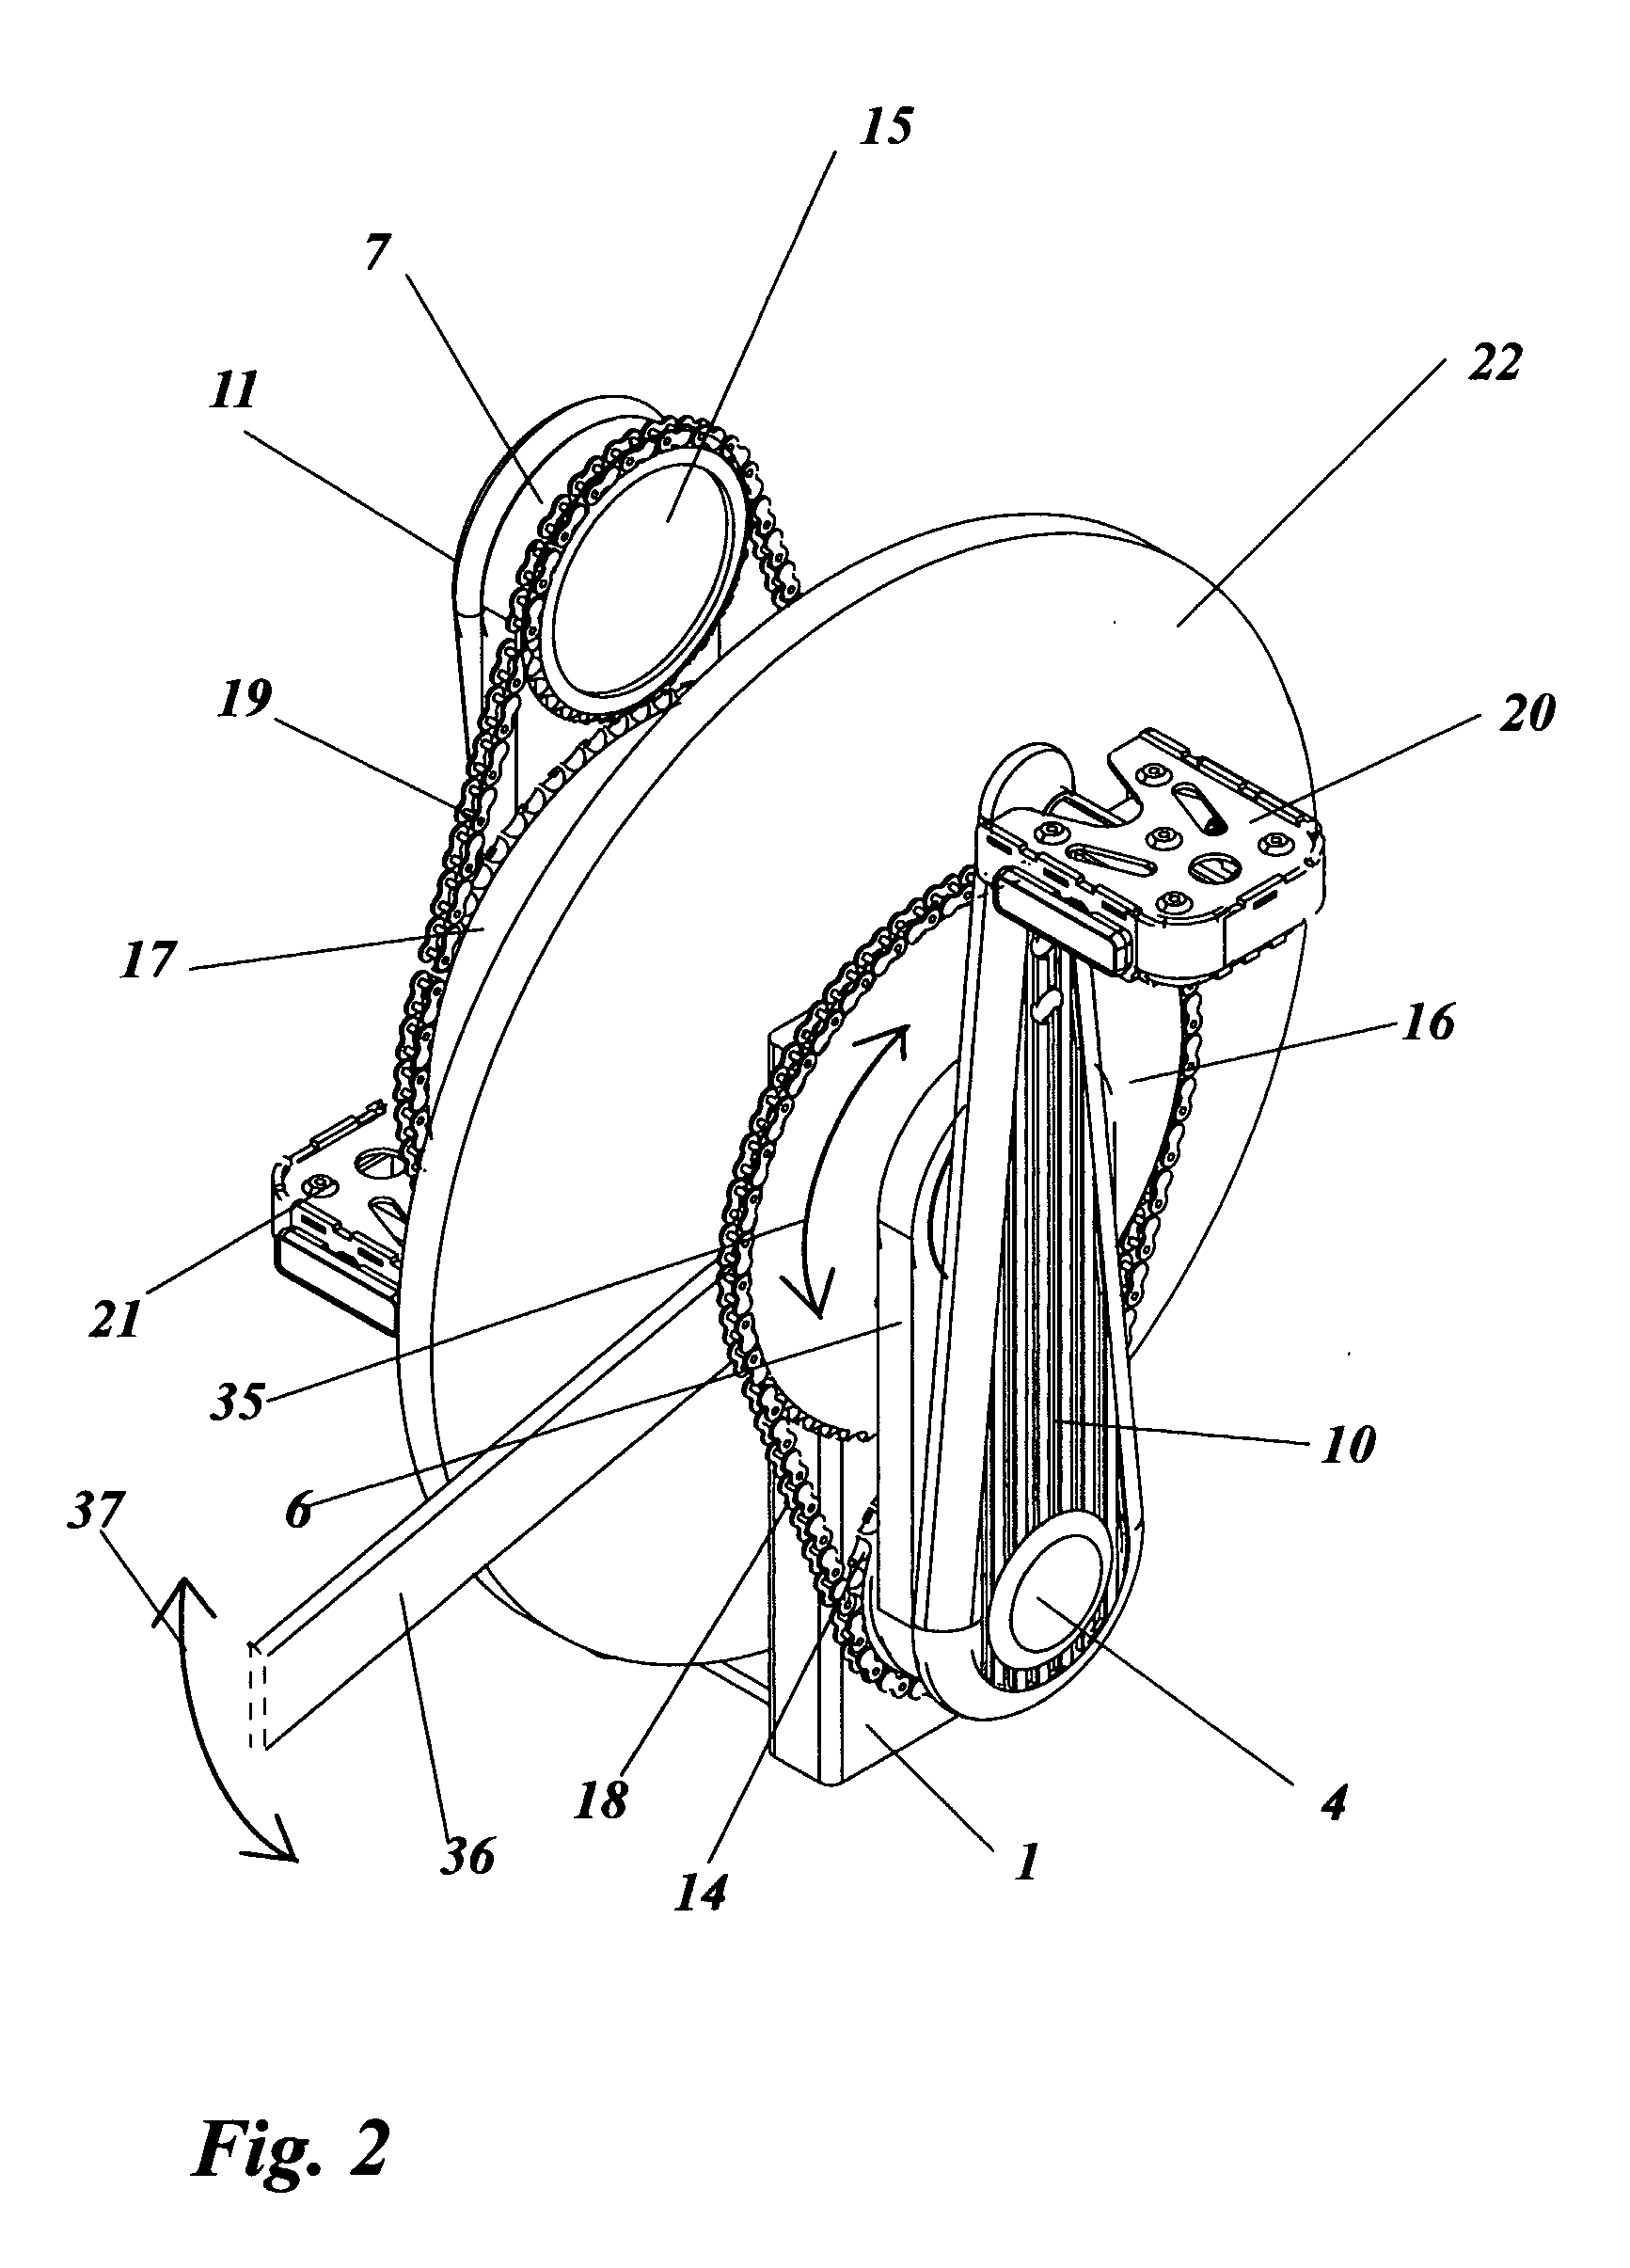 Apparatus for Physical Exercise, and a Crank Device and Foot Supporting Platforms for Use With Such Apparatus